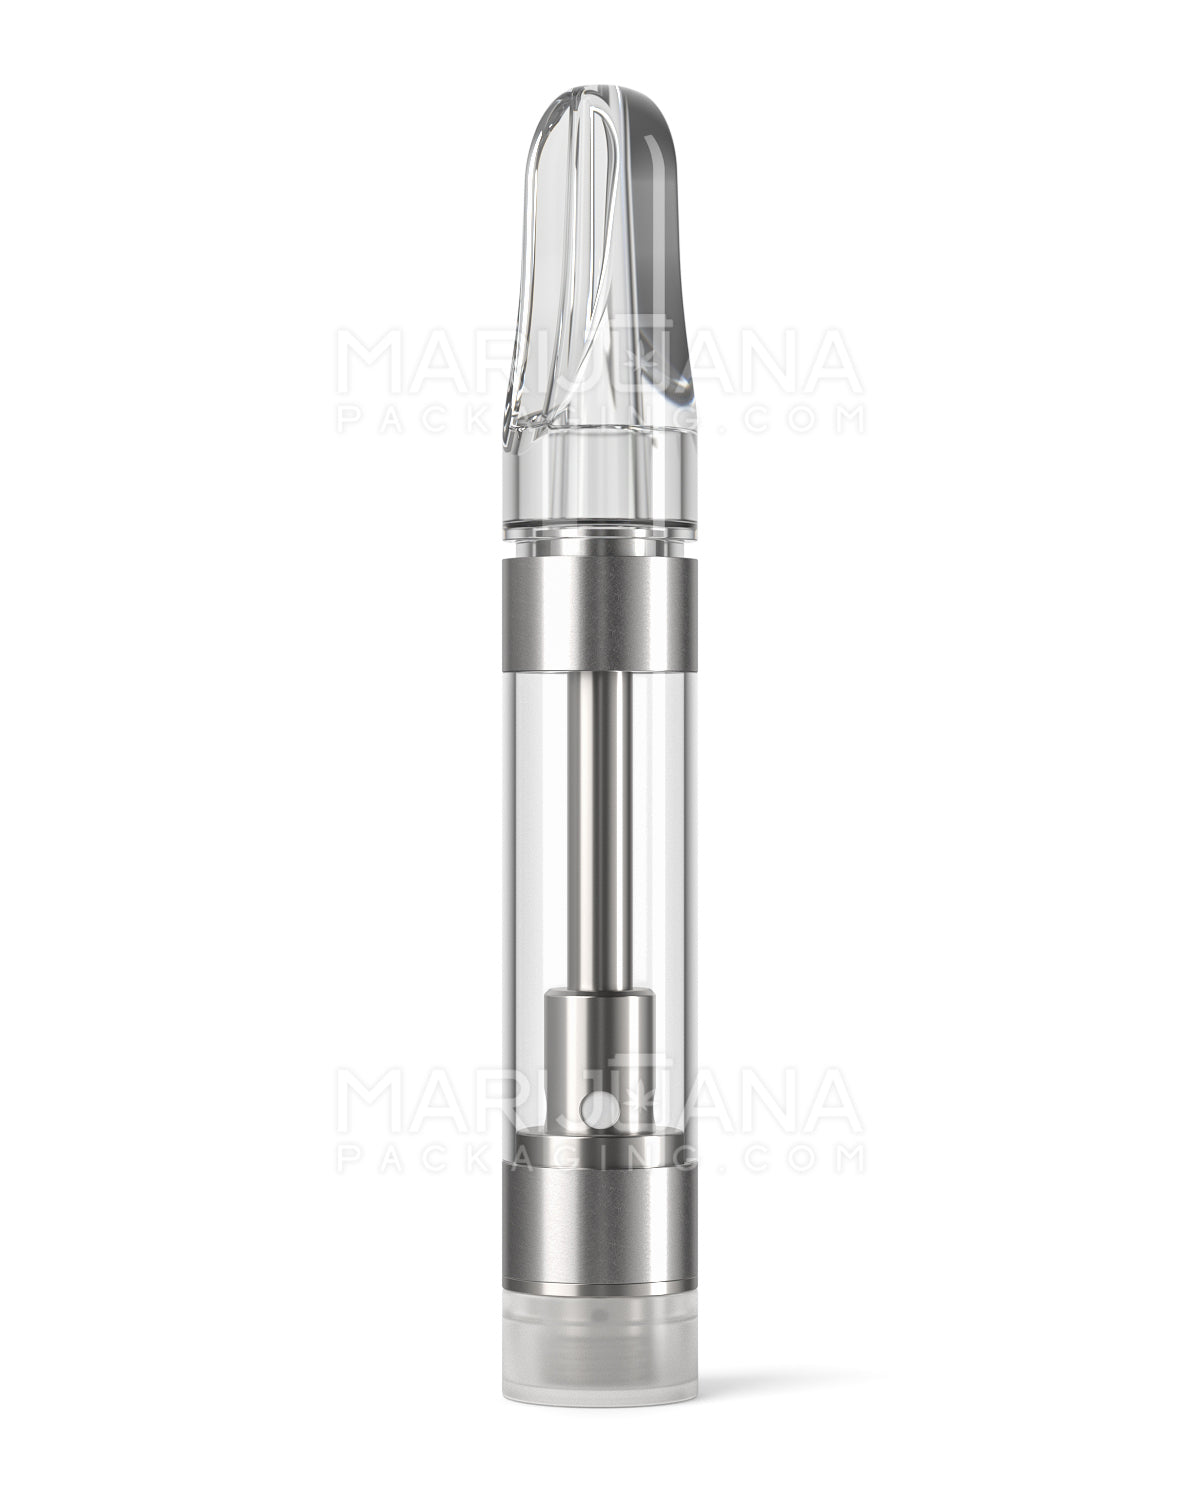 CCELL | Liquid6 Reactor Plastic Vape Cartridge with Clear Plastic Mouthpiece | 1mL - Press On - 100 Count - 3